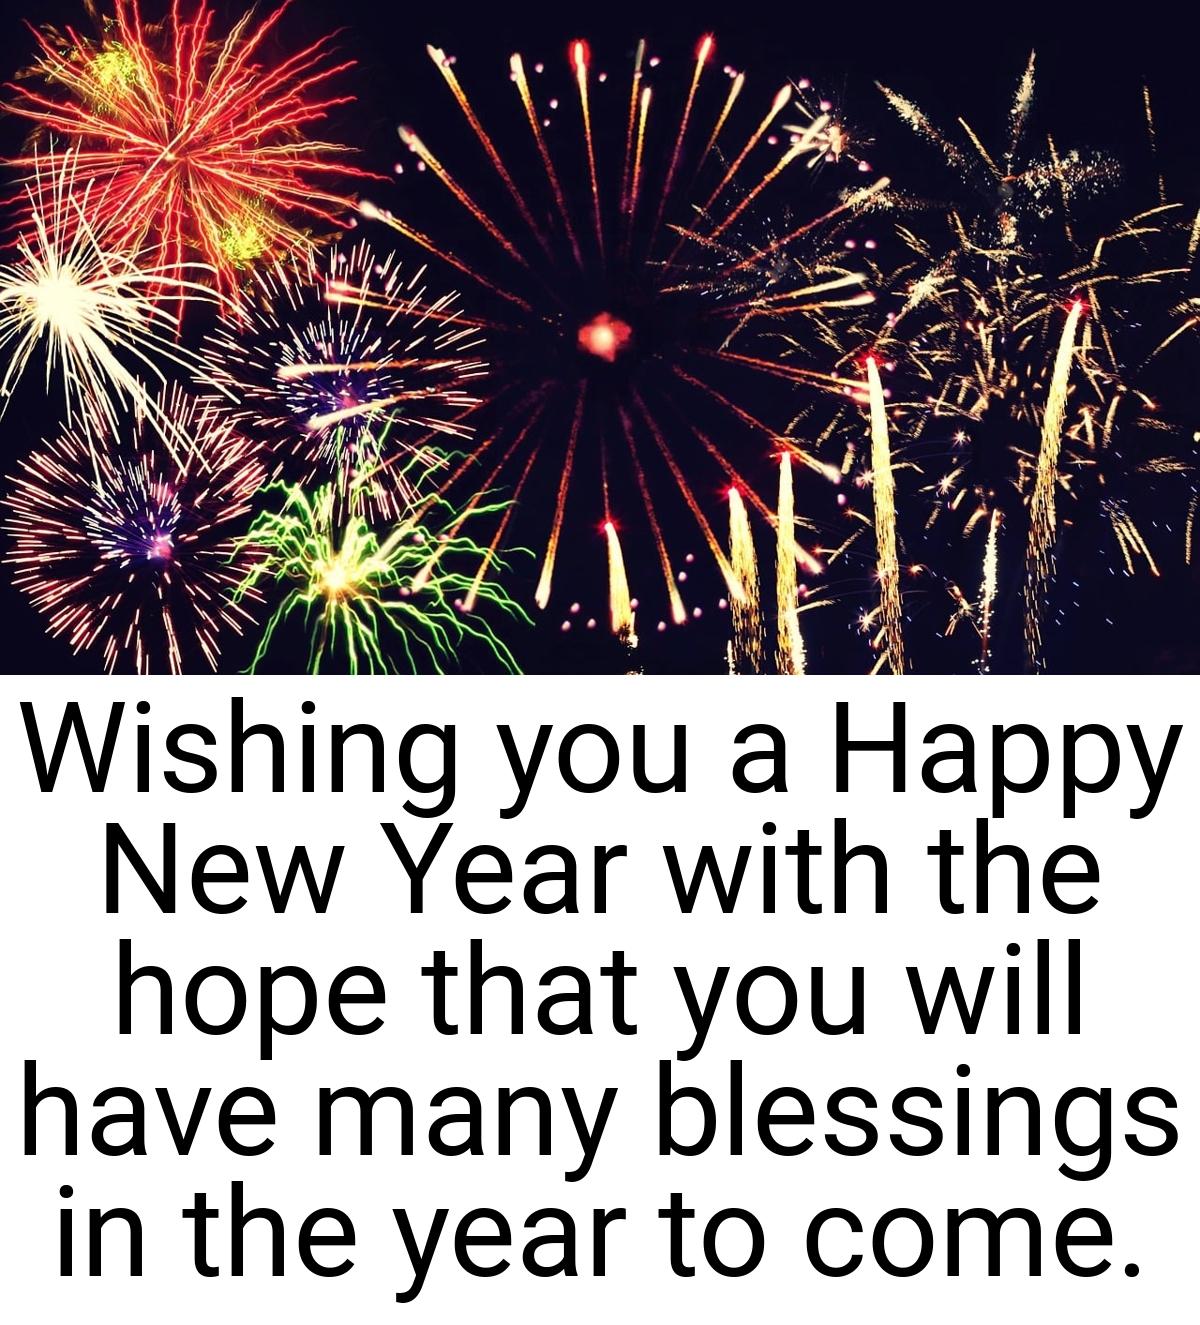 Wishing you a Happy New Year with the hope that you will